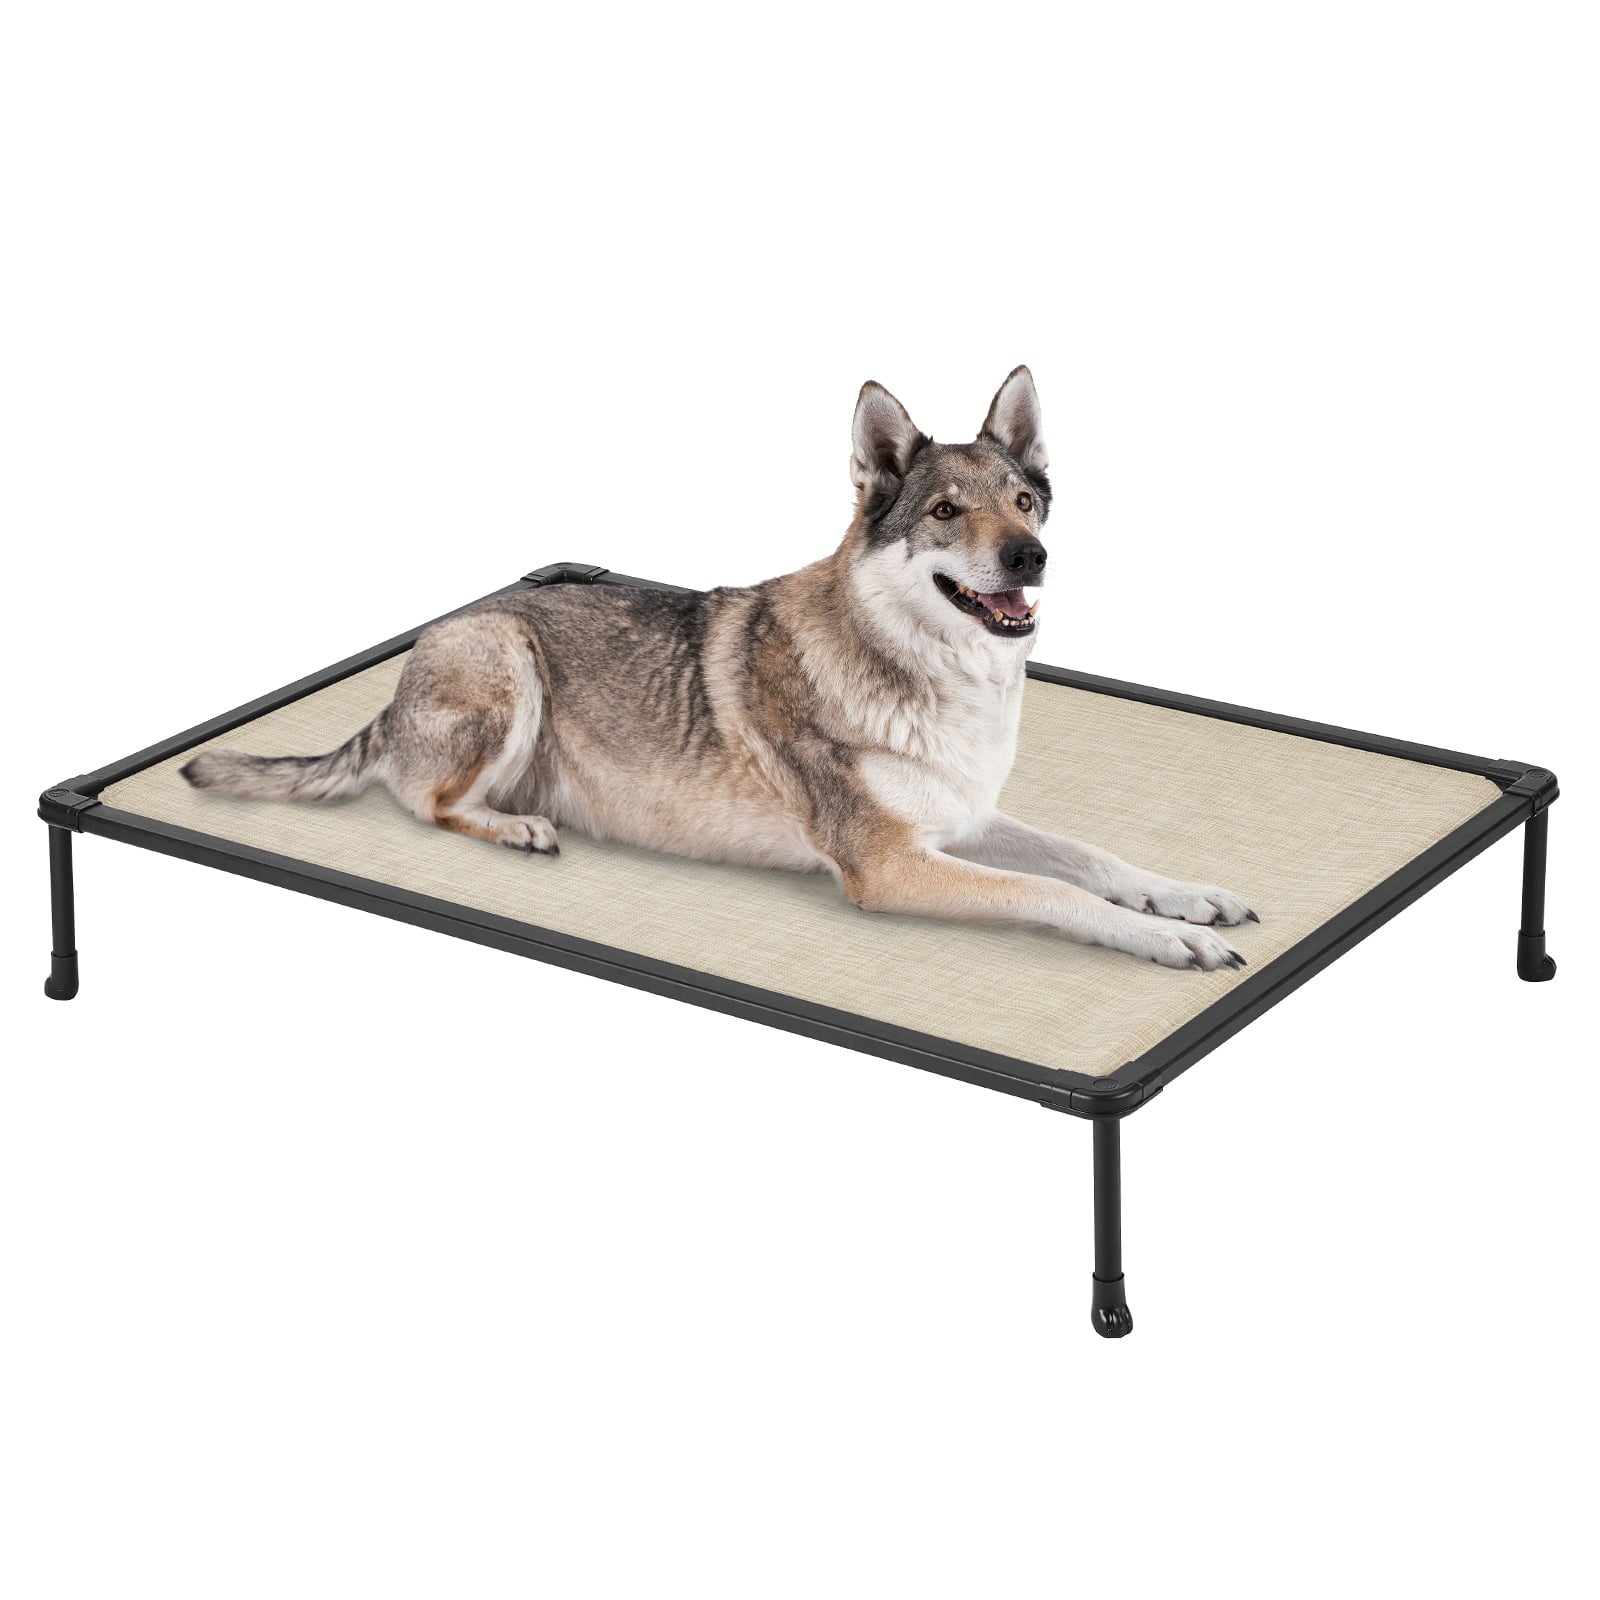 Veehoo Chewproof Dog Bed， Cooling Raised Dog Cots with Black Metal Frame， X Large， Beige Coffee